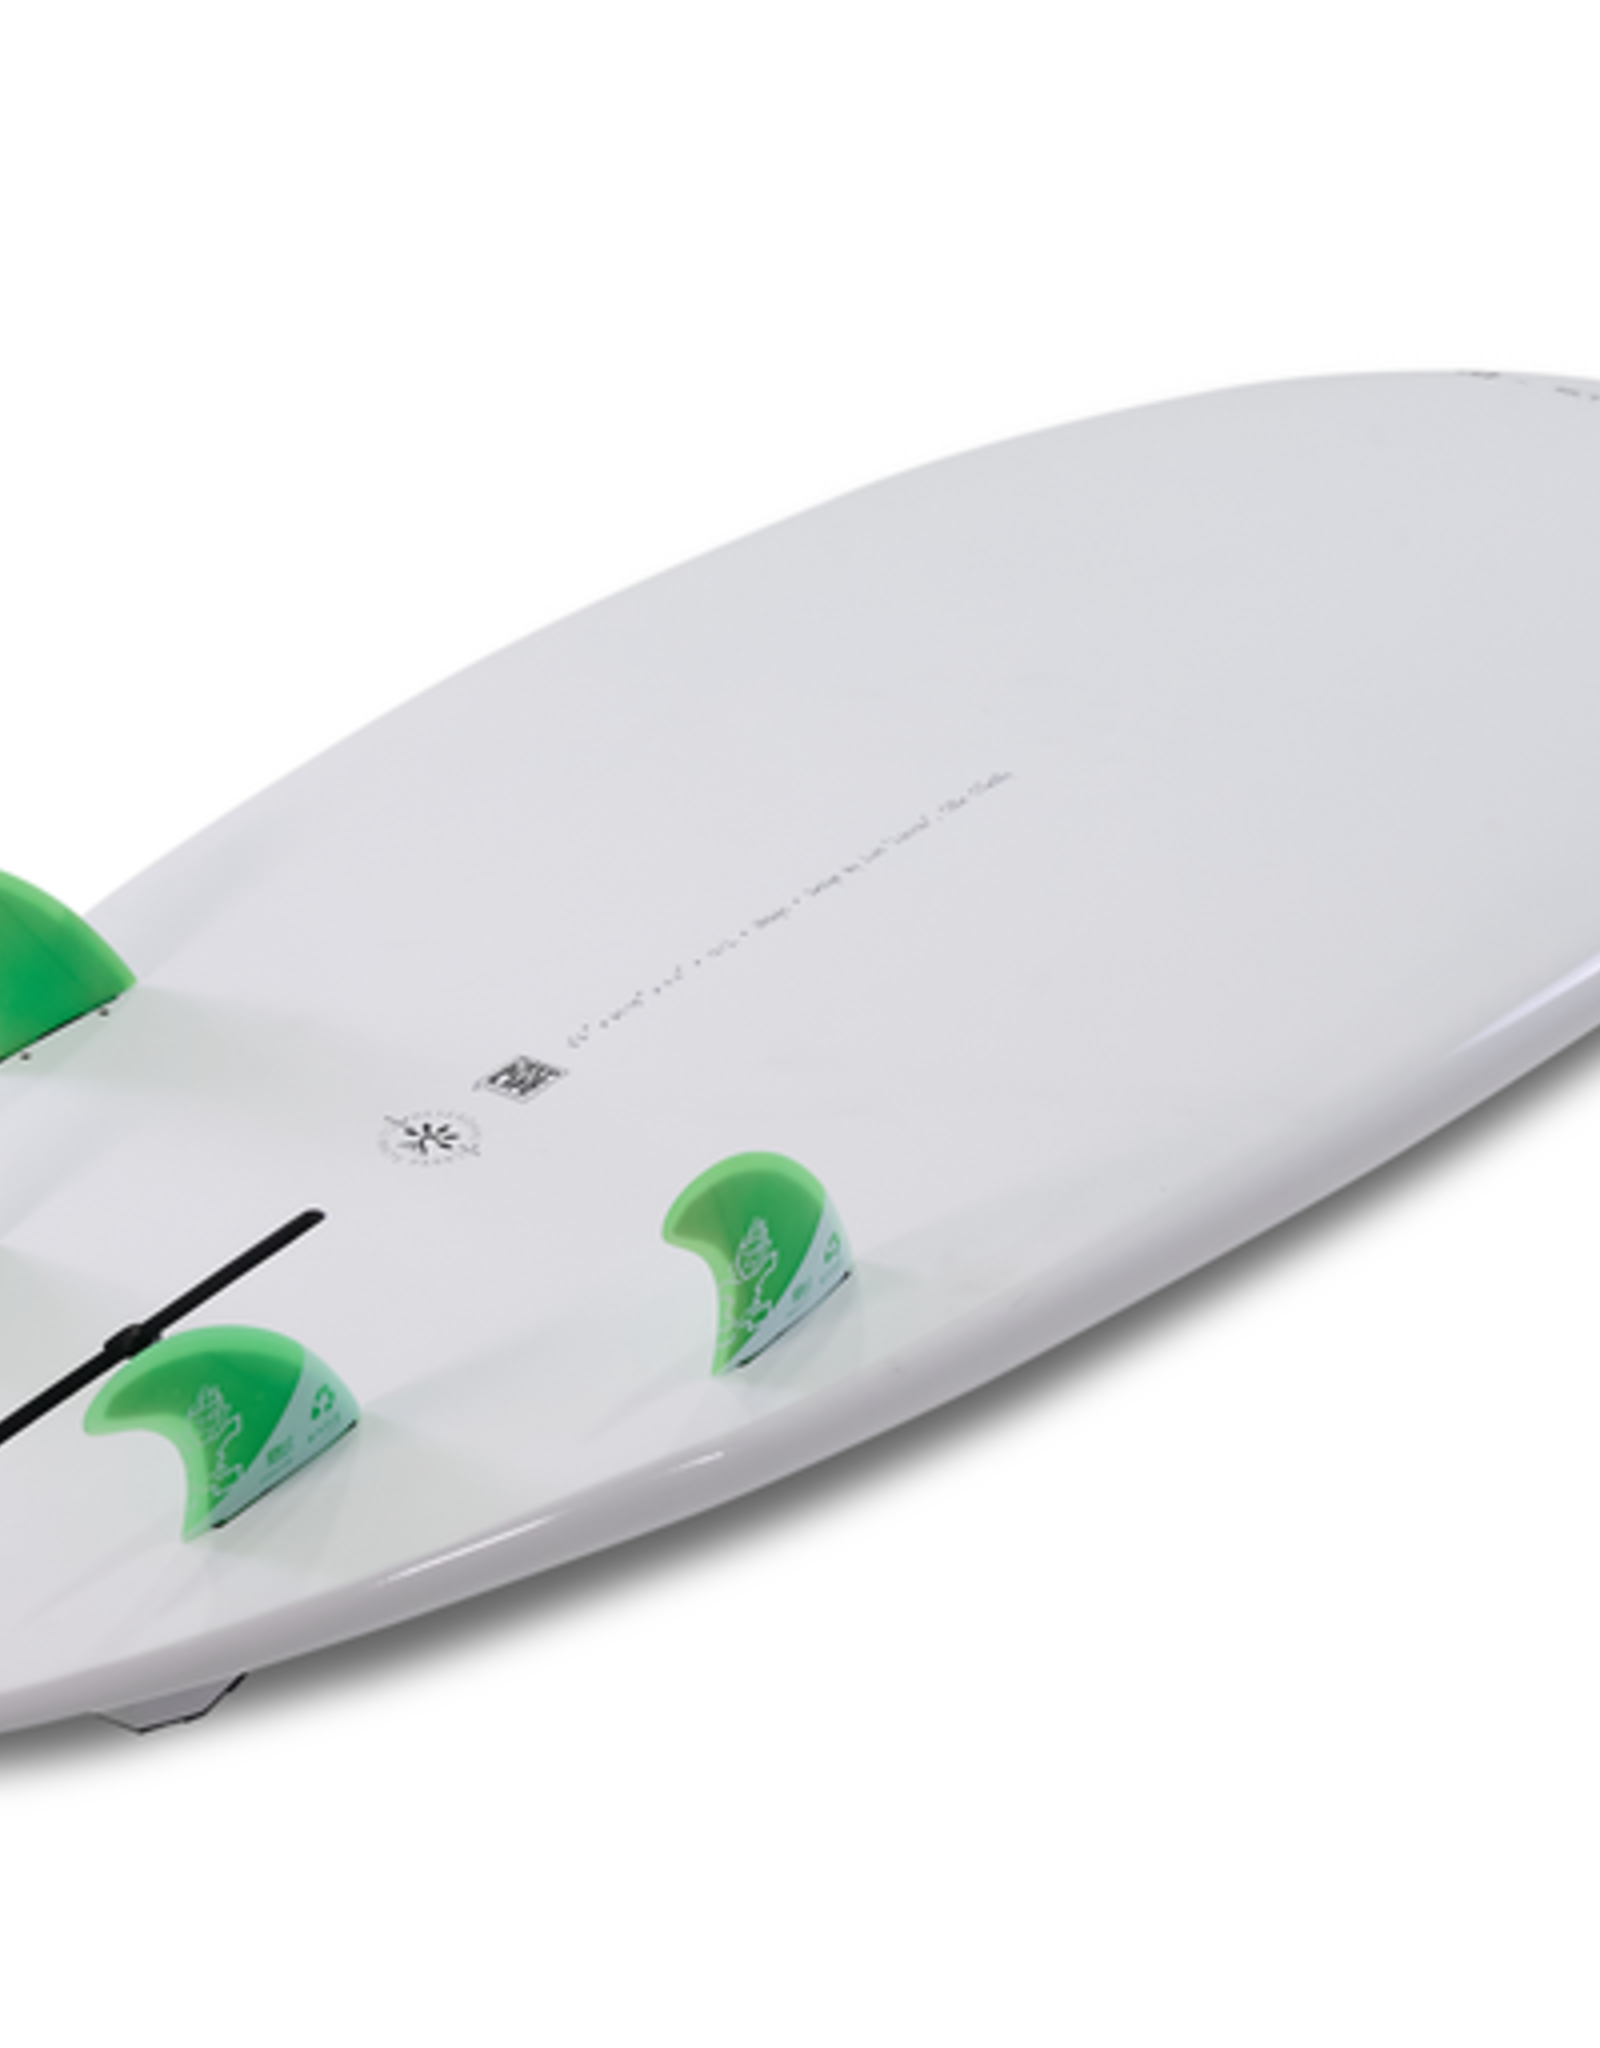 Starboard 2023 STARBOARD SPICE 9'3X32.75 LIMITED SERIES